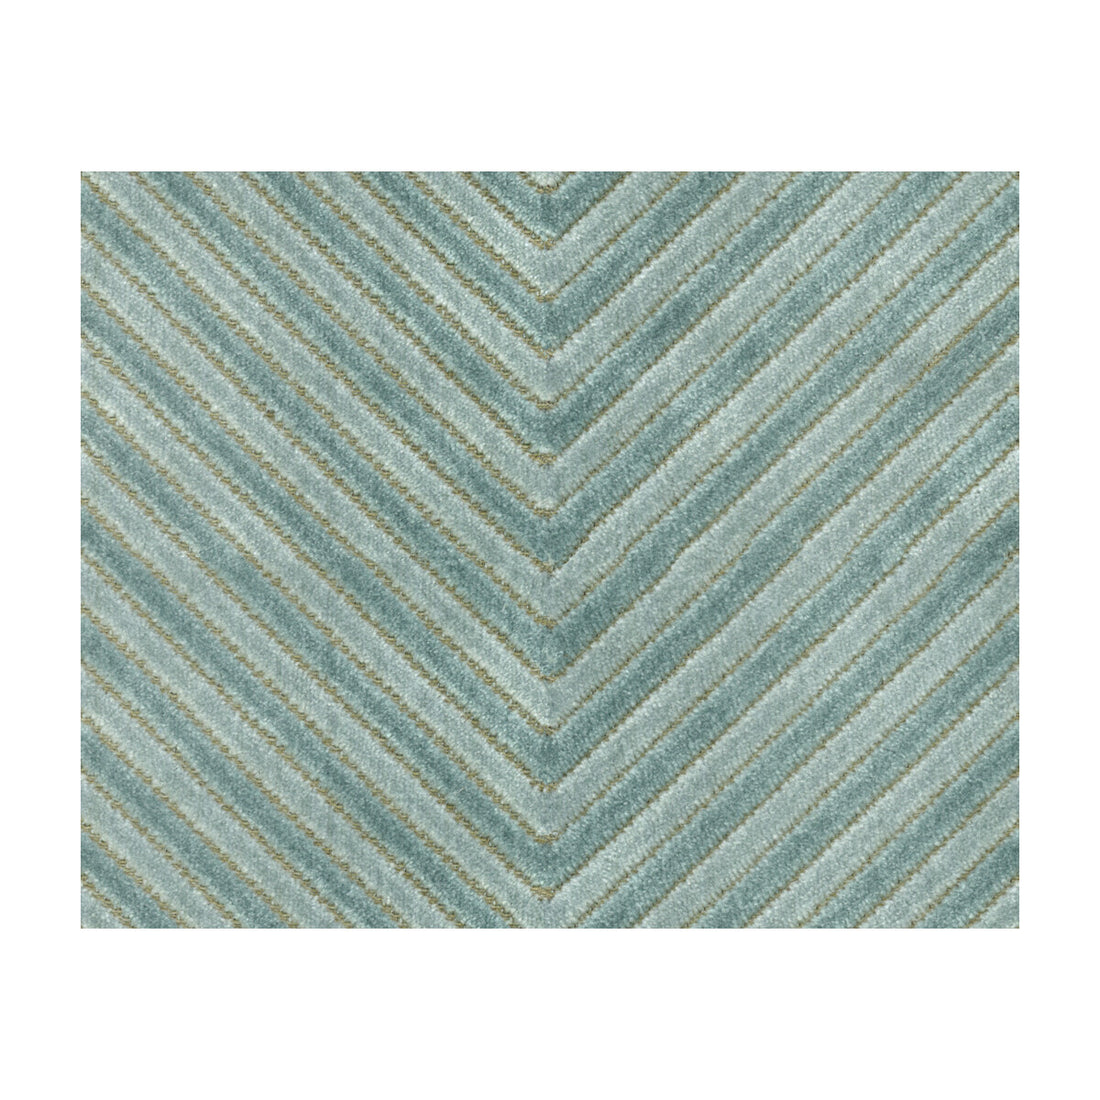 Wishbone fabric in aqua color - pattern 36041.35.0 - by Kravet Contract in the Sarah Richardson Harmony collection